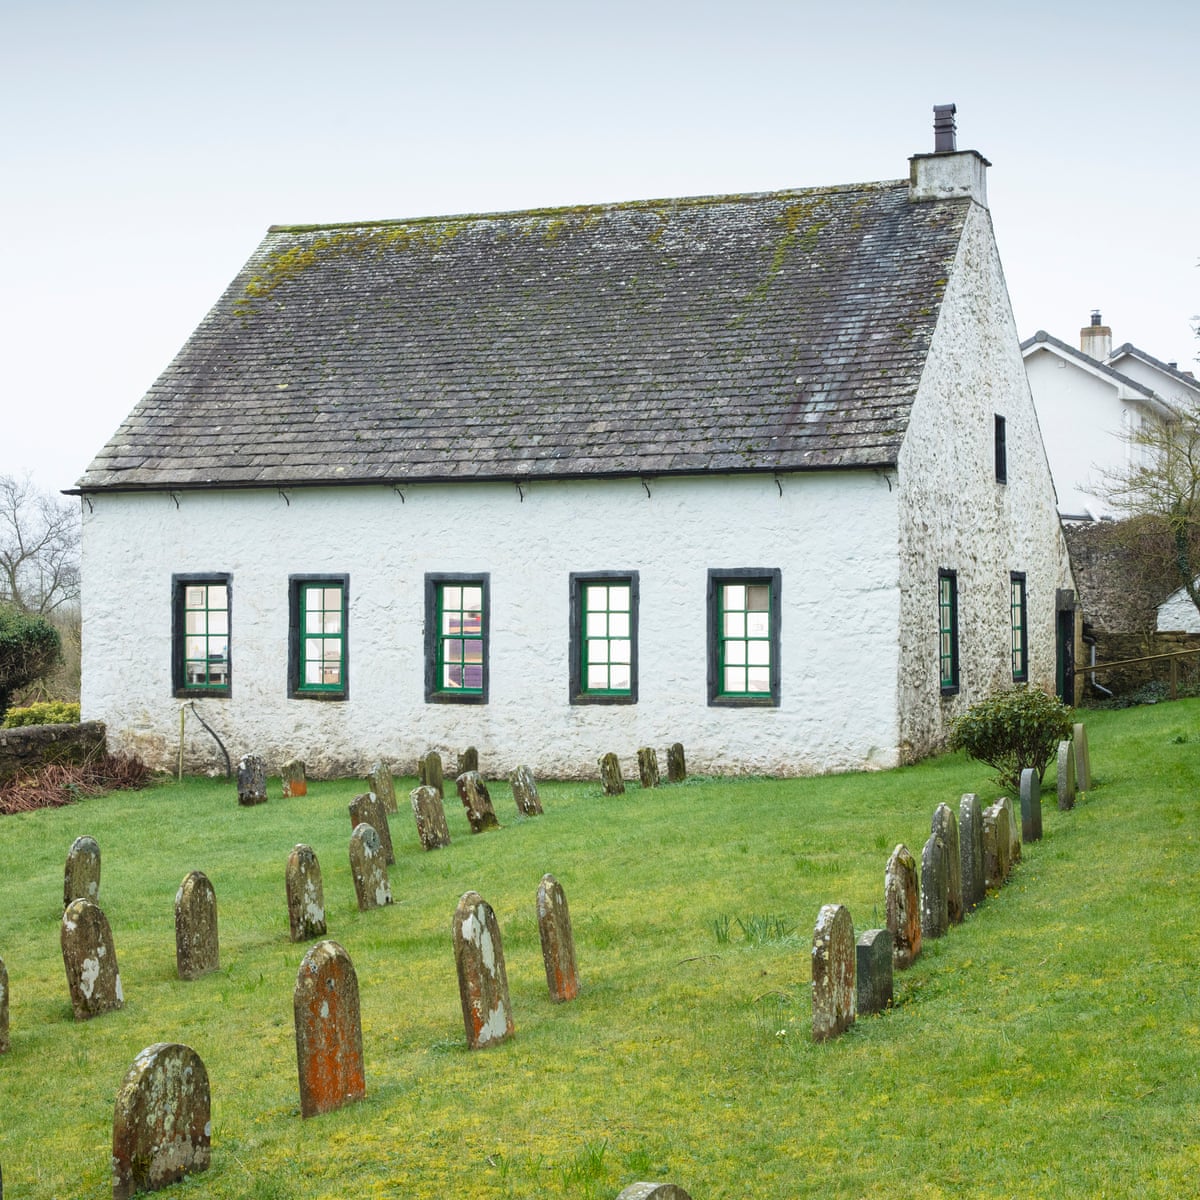 Saved for the nation: Quaker meeting houses where silence is cherished |  Architecture | The Guardian